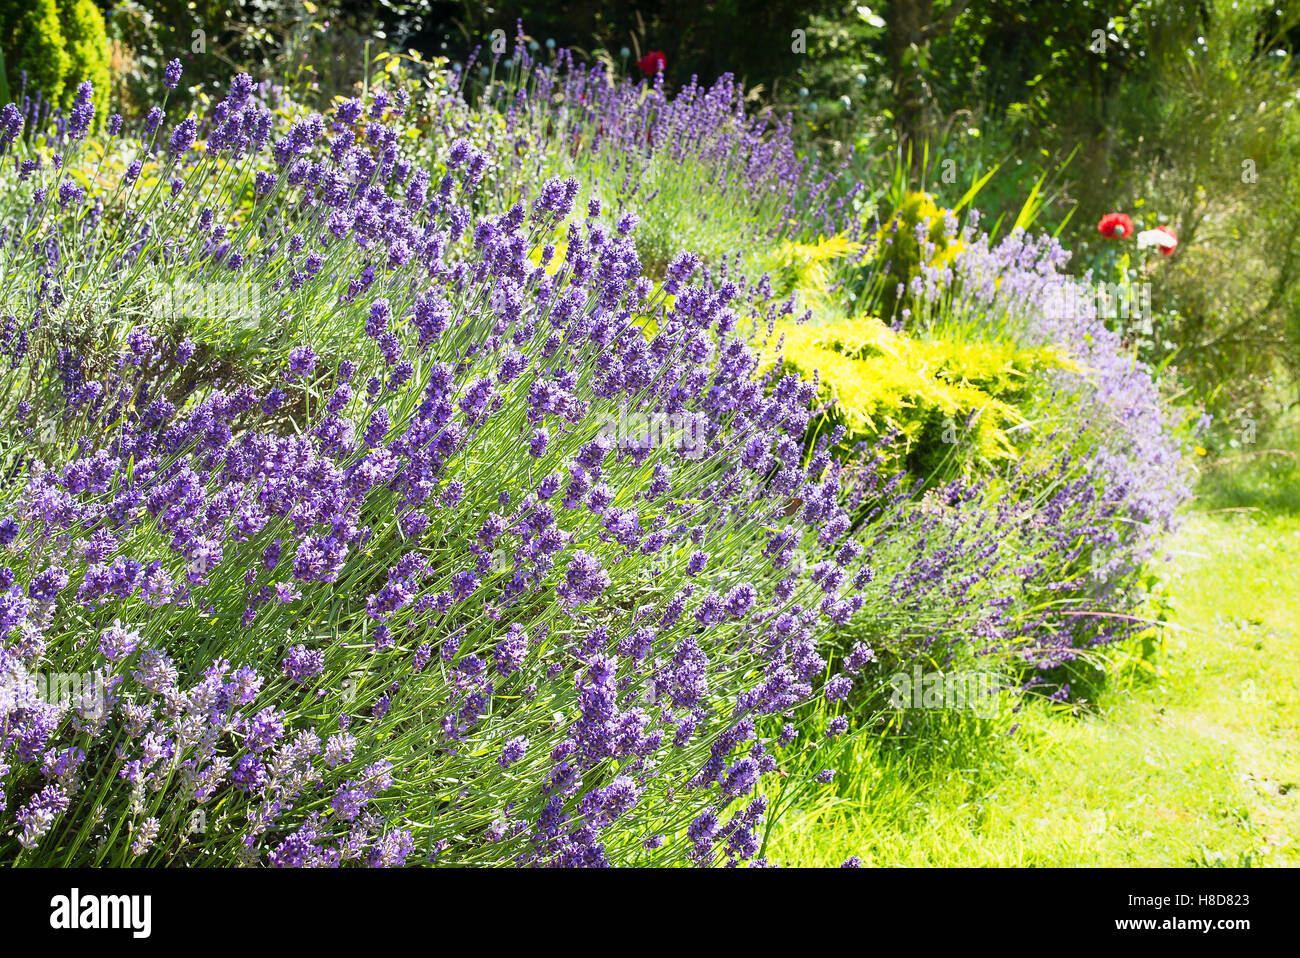 Lavender garden on the fringe of a lawn in an English garden Stock Photo